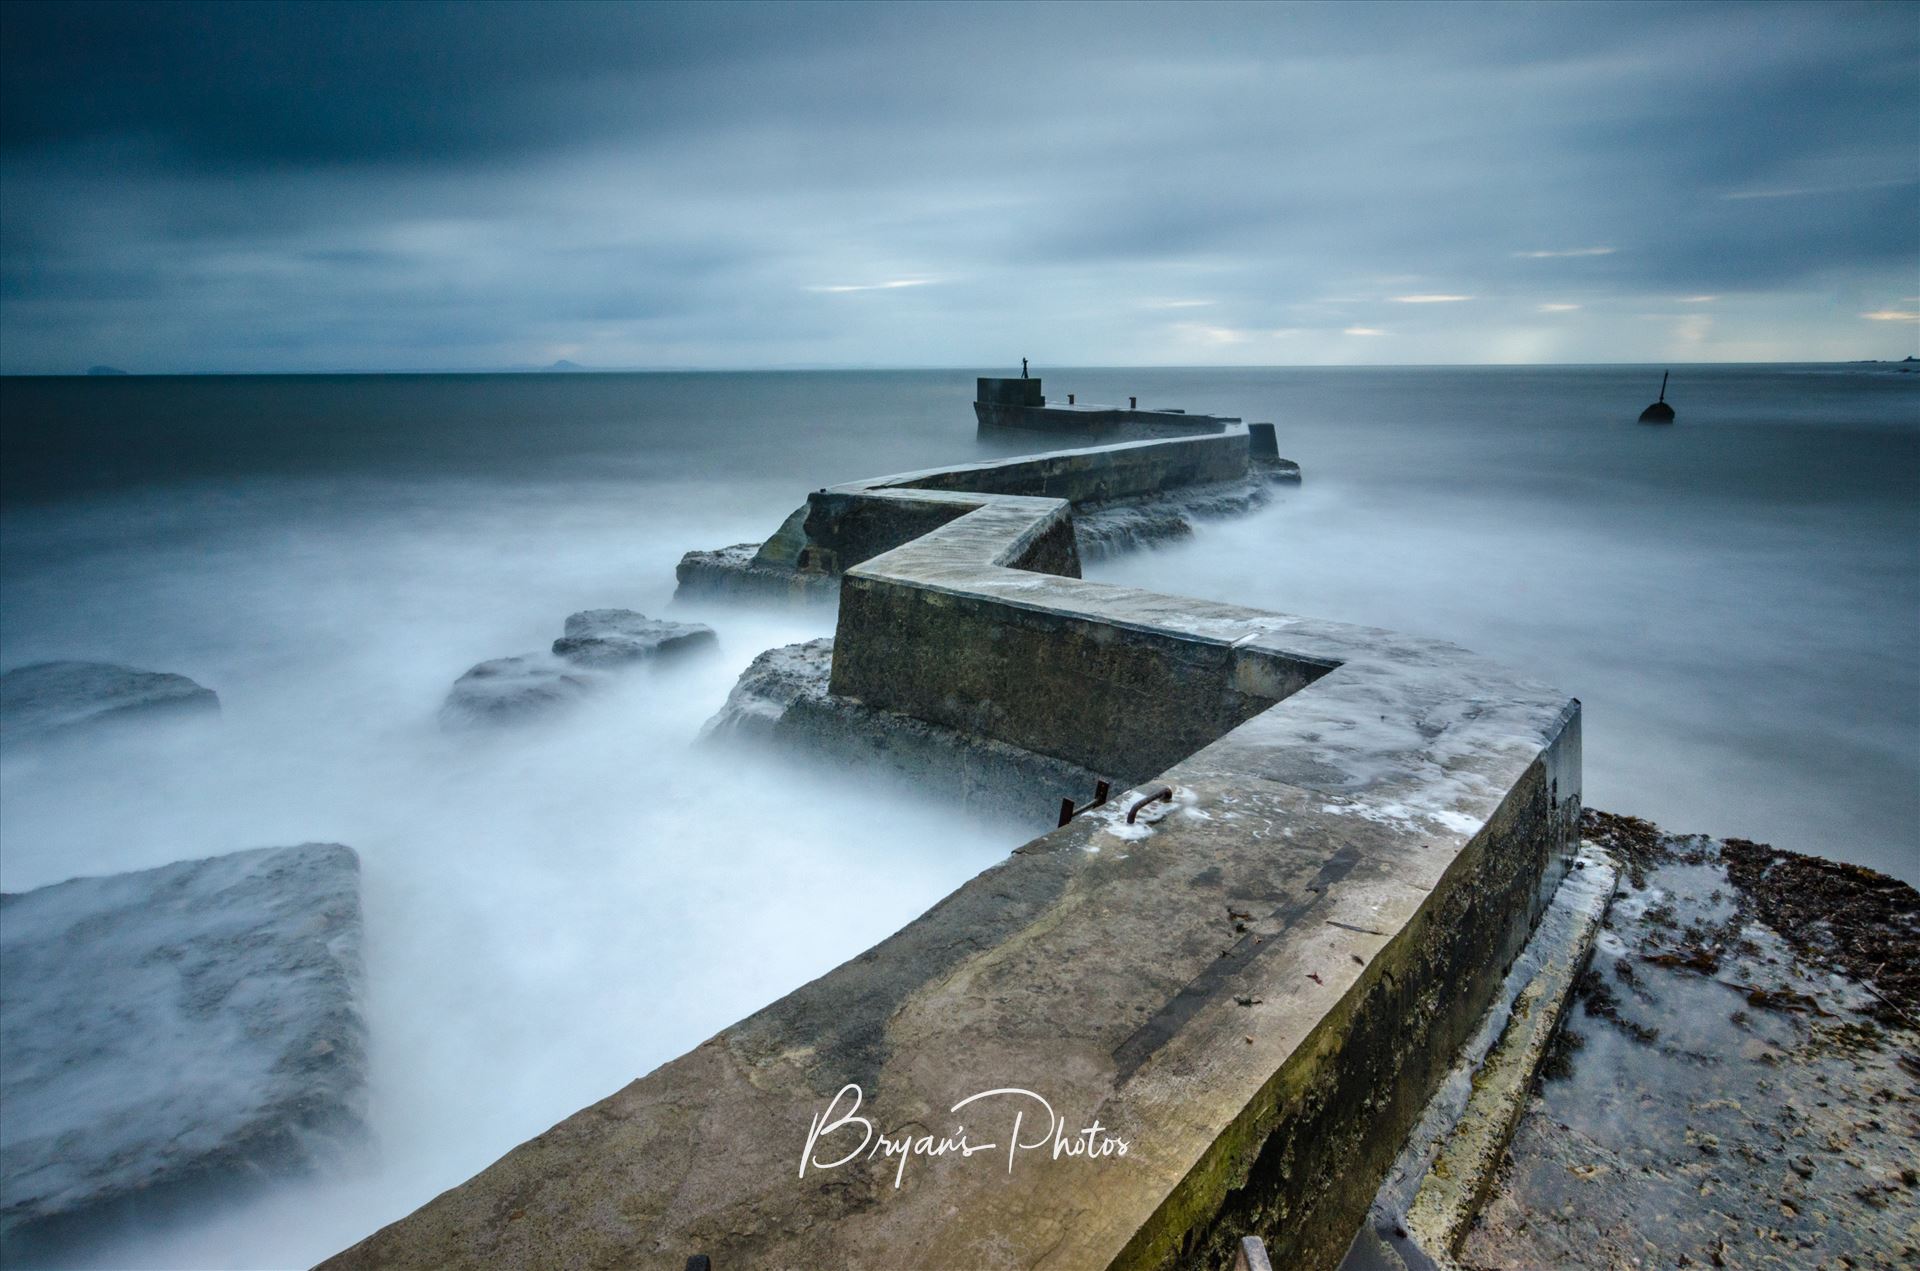 St Monans A long exposure photo of the breakwater at St Monans on the Fife coast of Scotland by Bryans Photos